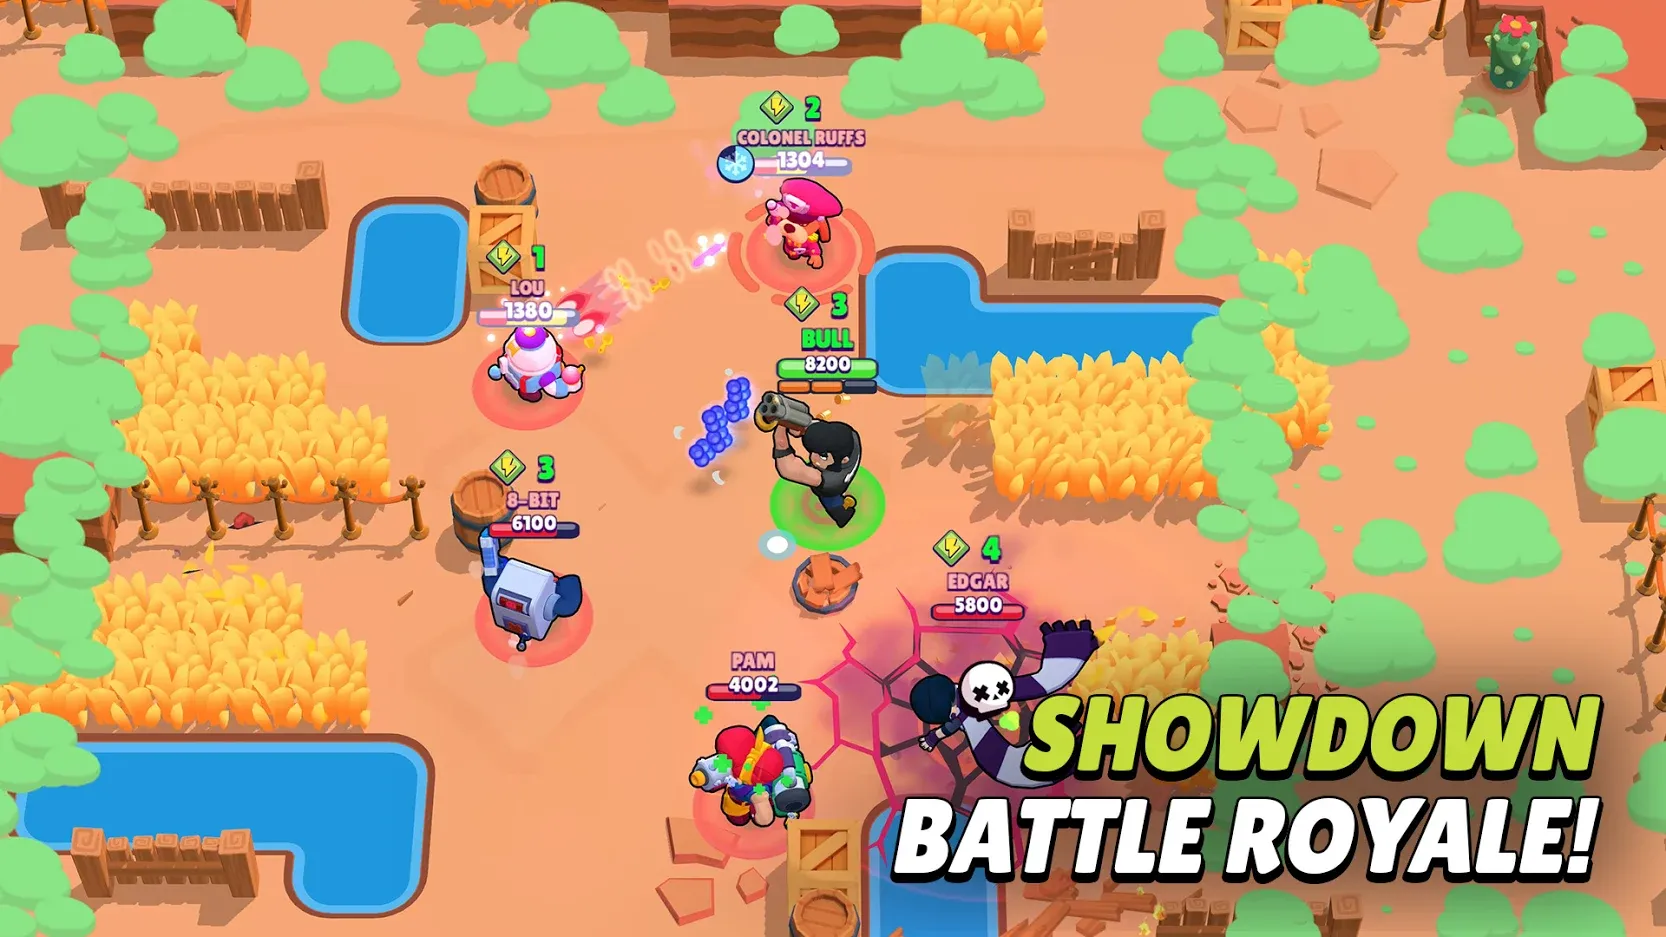 Brawl Stars APK Download for Android Free